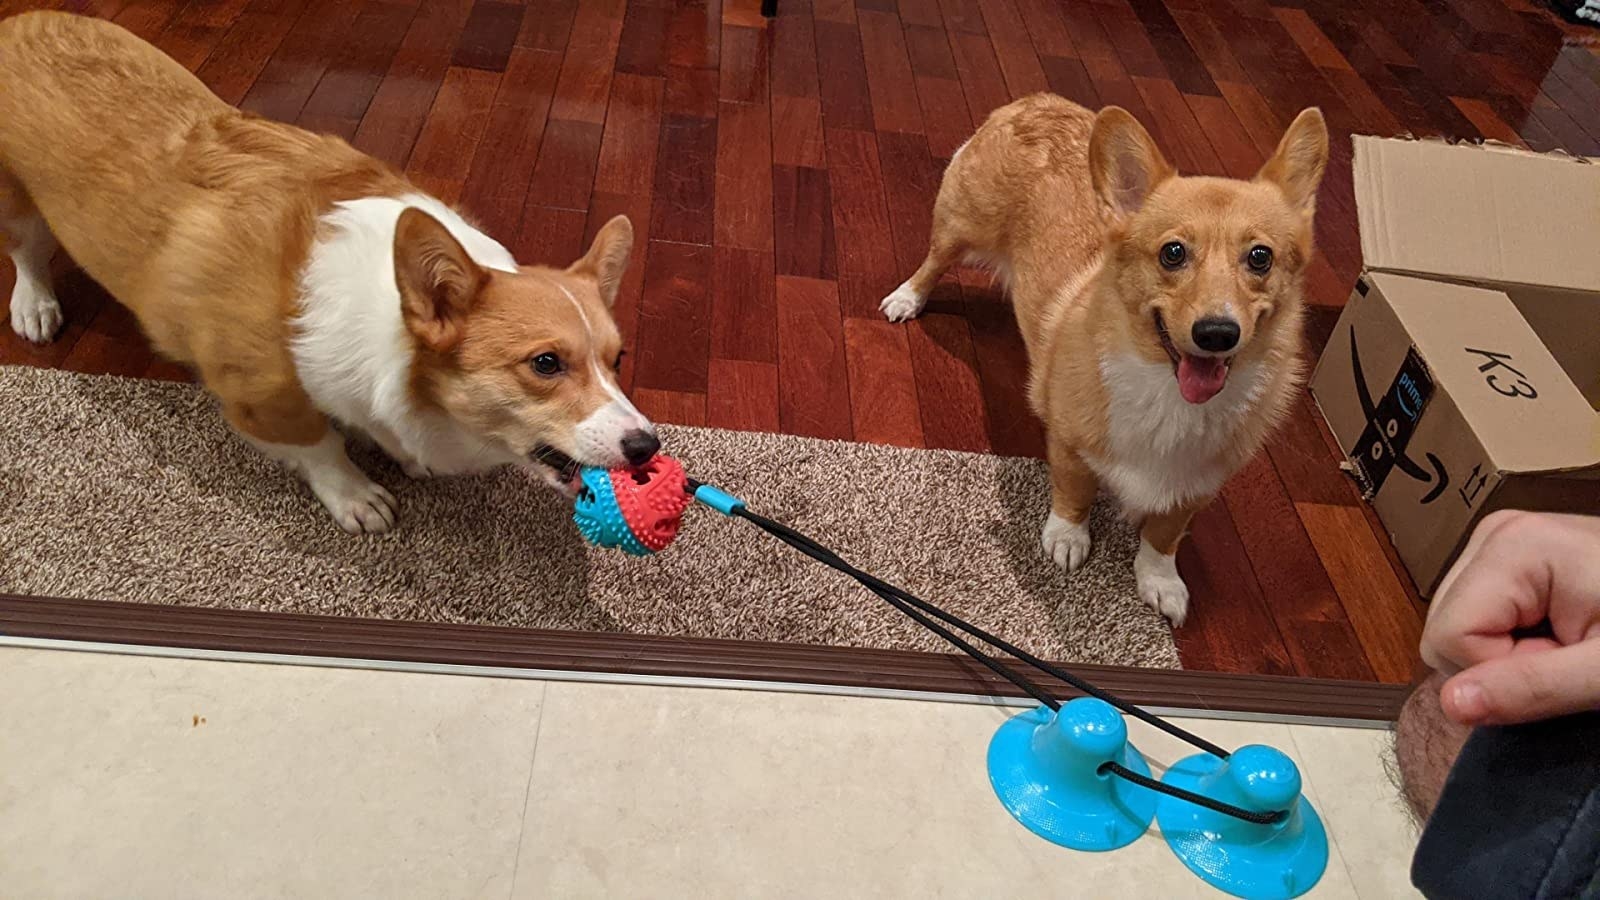 A corgi pulling on the ball suctioned to the floor